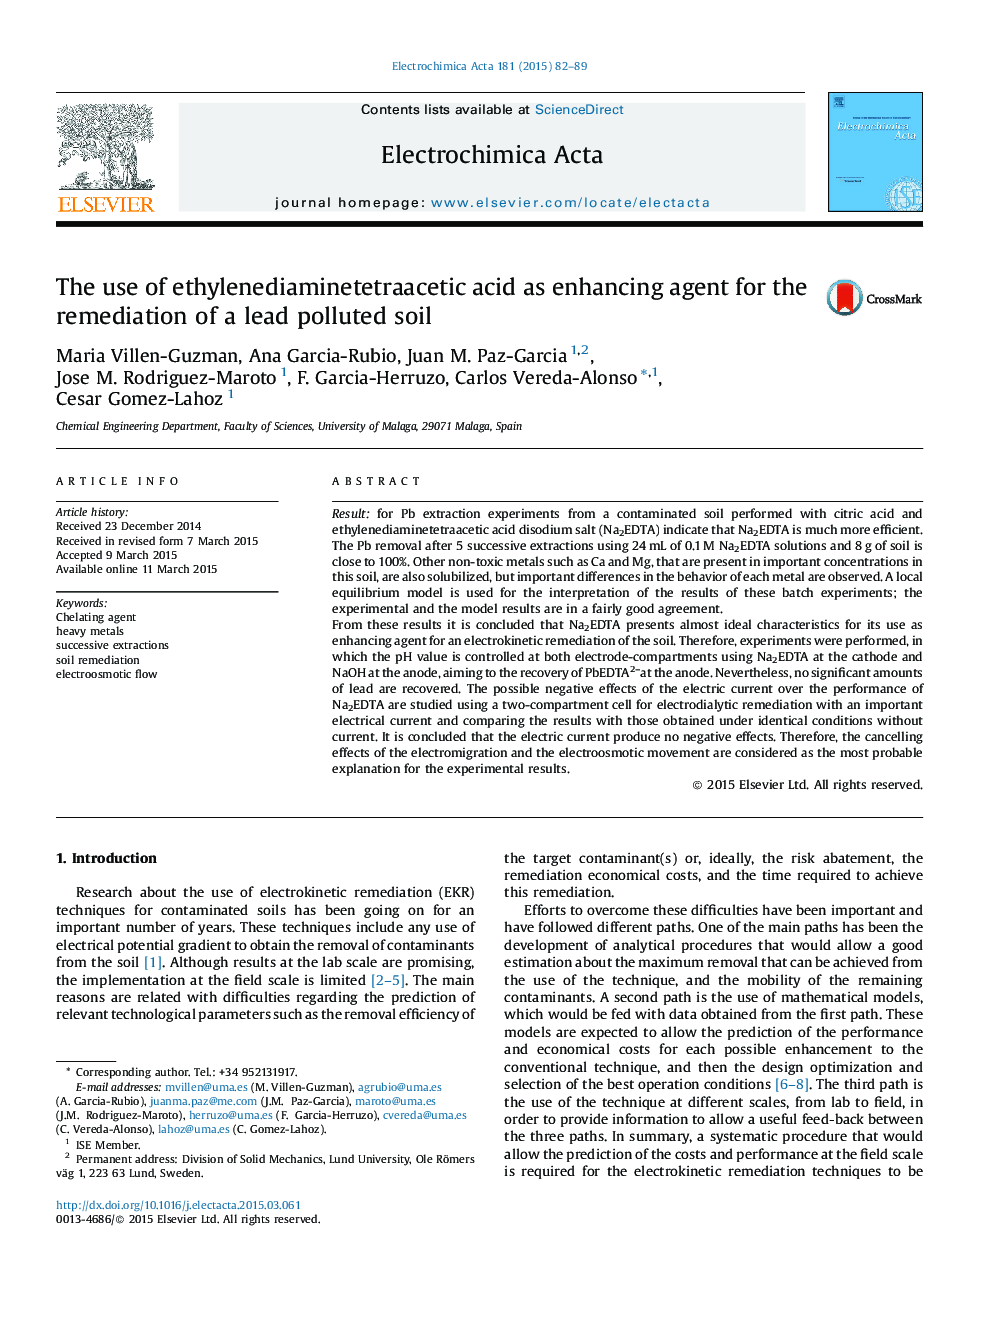 The use of ethylenediaminetetraacetic acid as enhancing agent for the remediation of a lead polluted soil